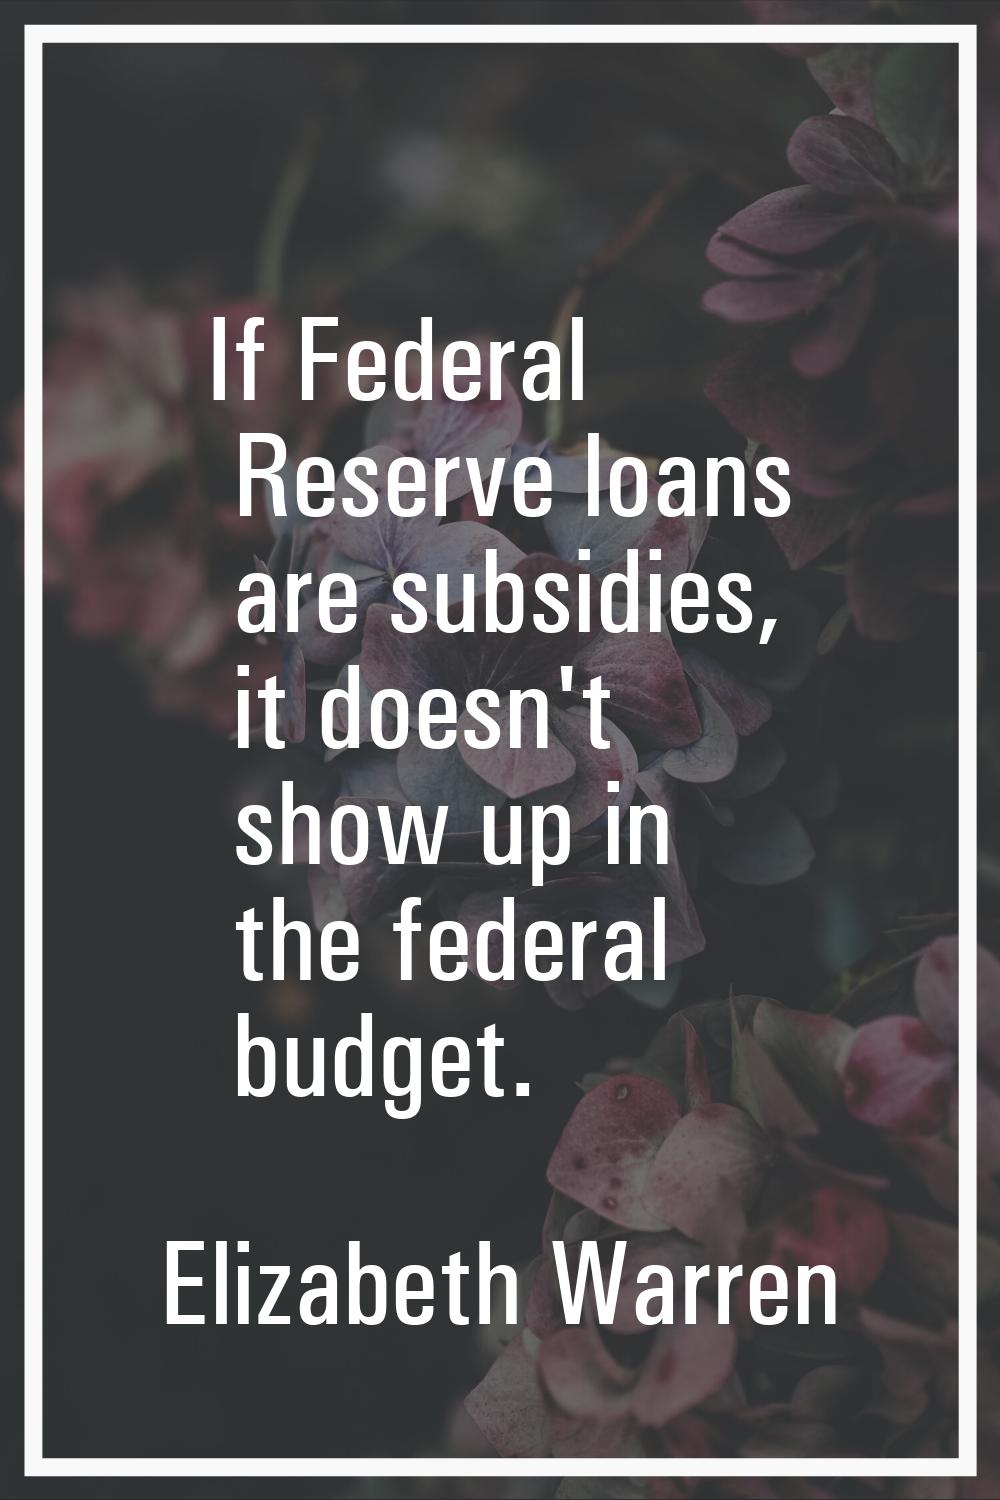 If Federal Reserve loans are subsidies, it doesn't show up in the federal budget.